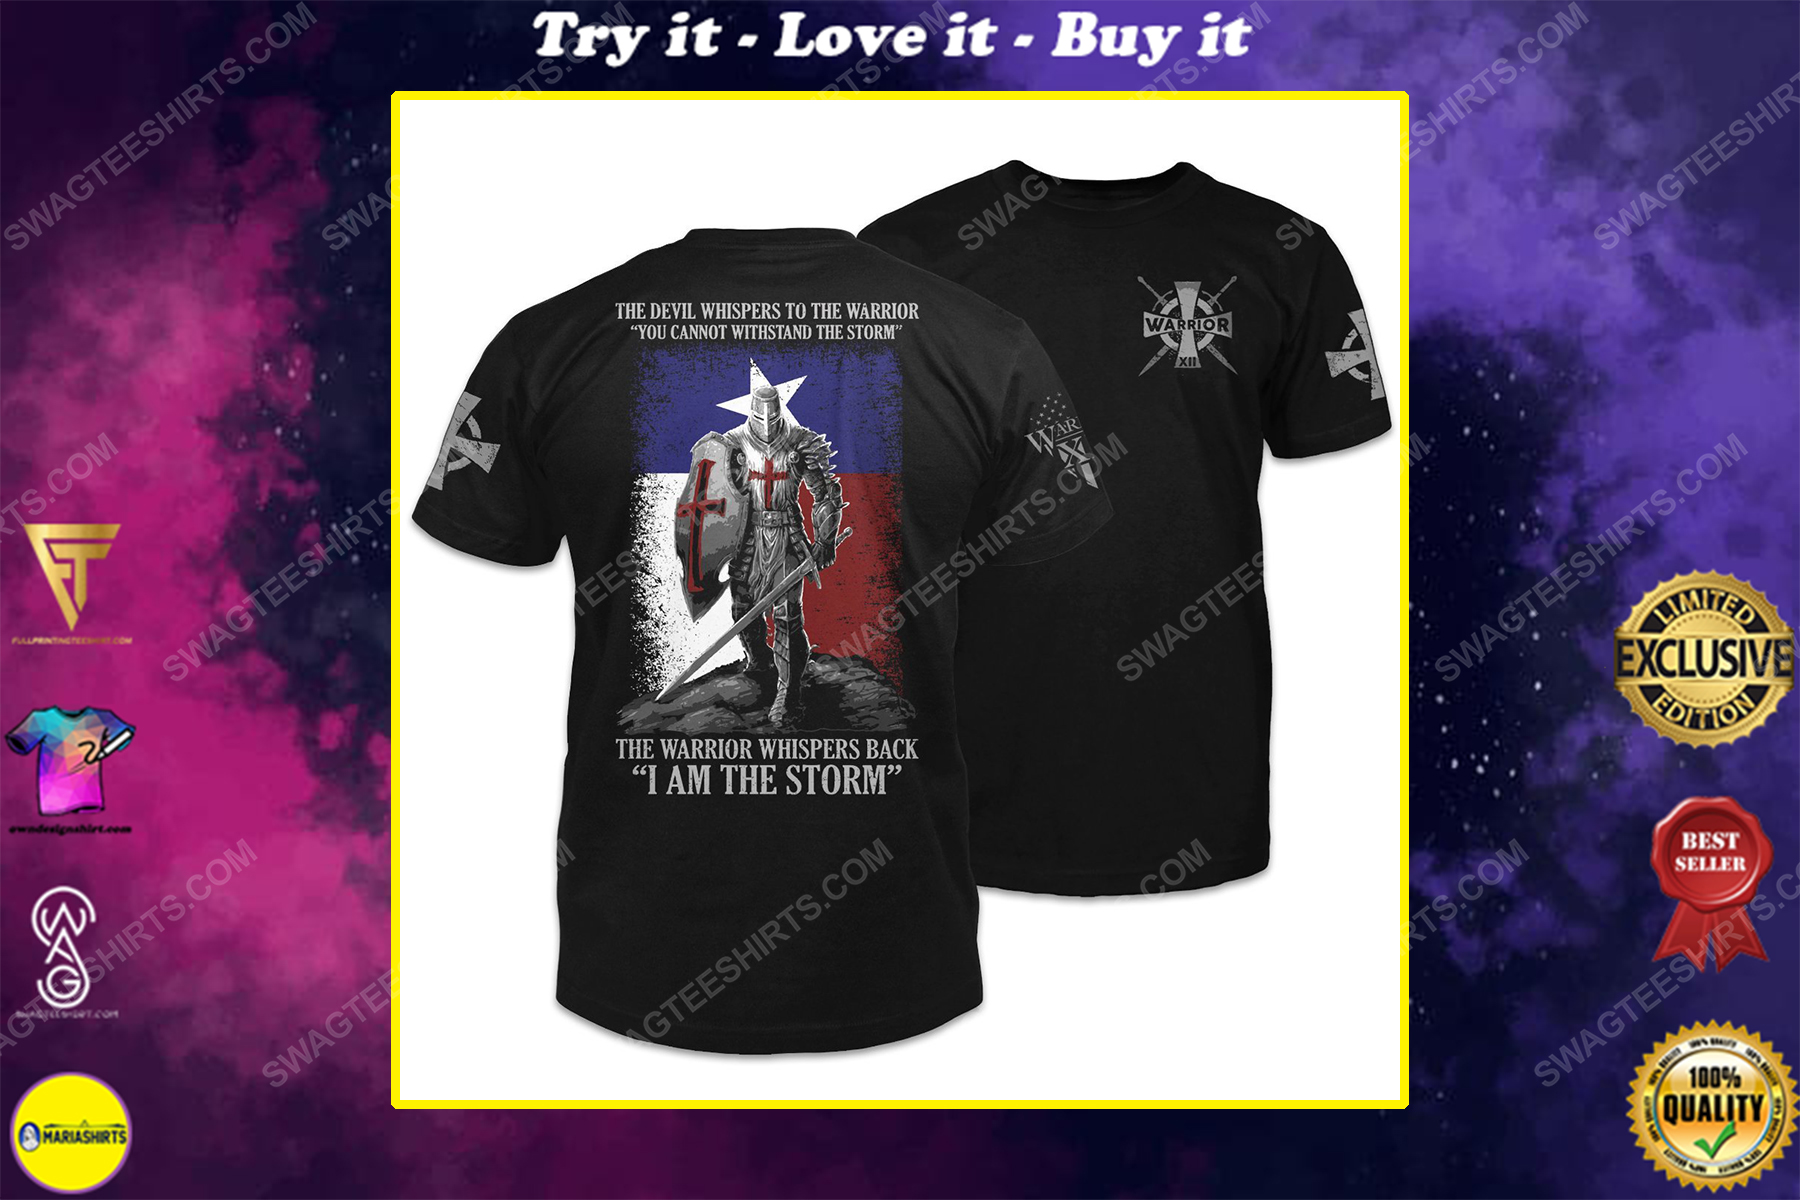 Texas crusader the devil whispers to the warrior shirt